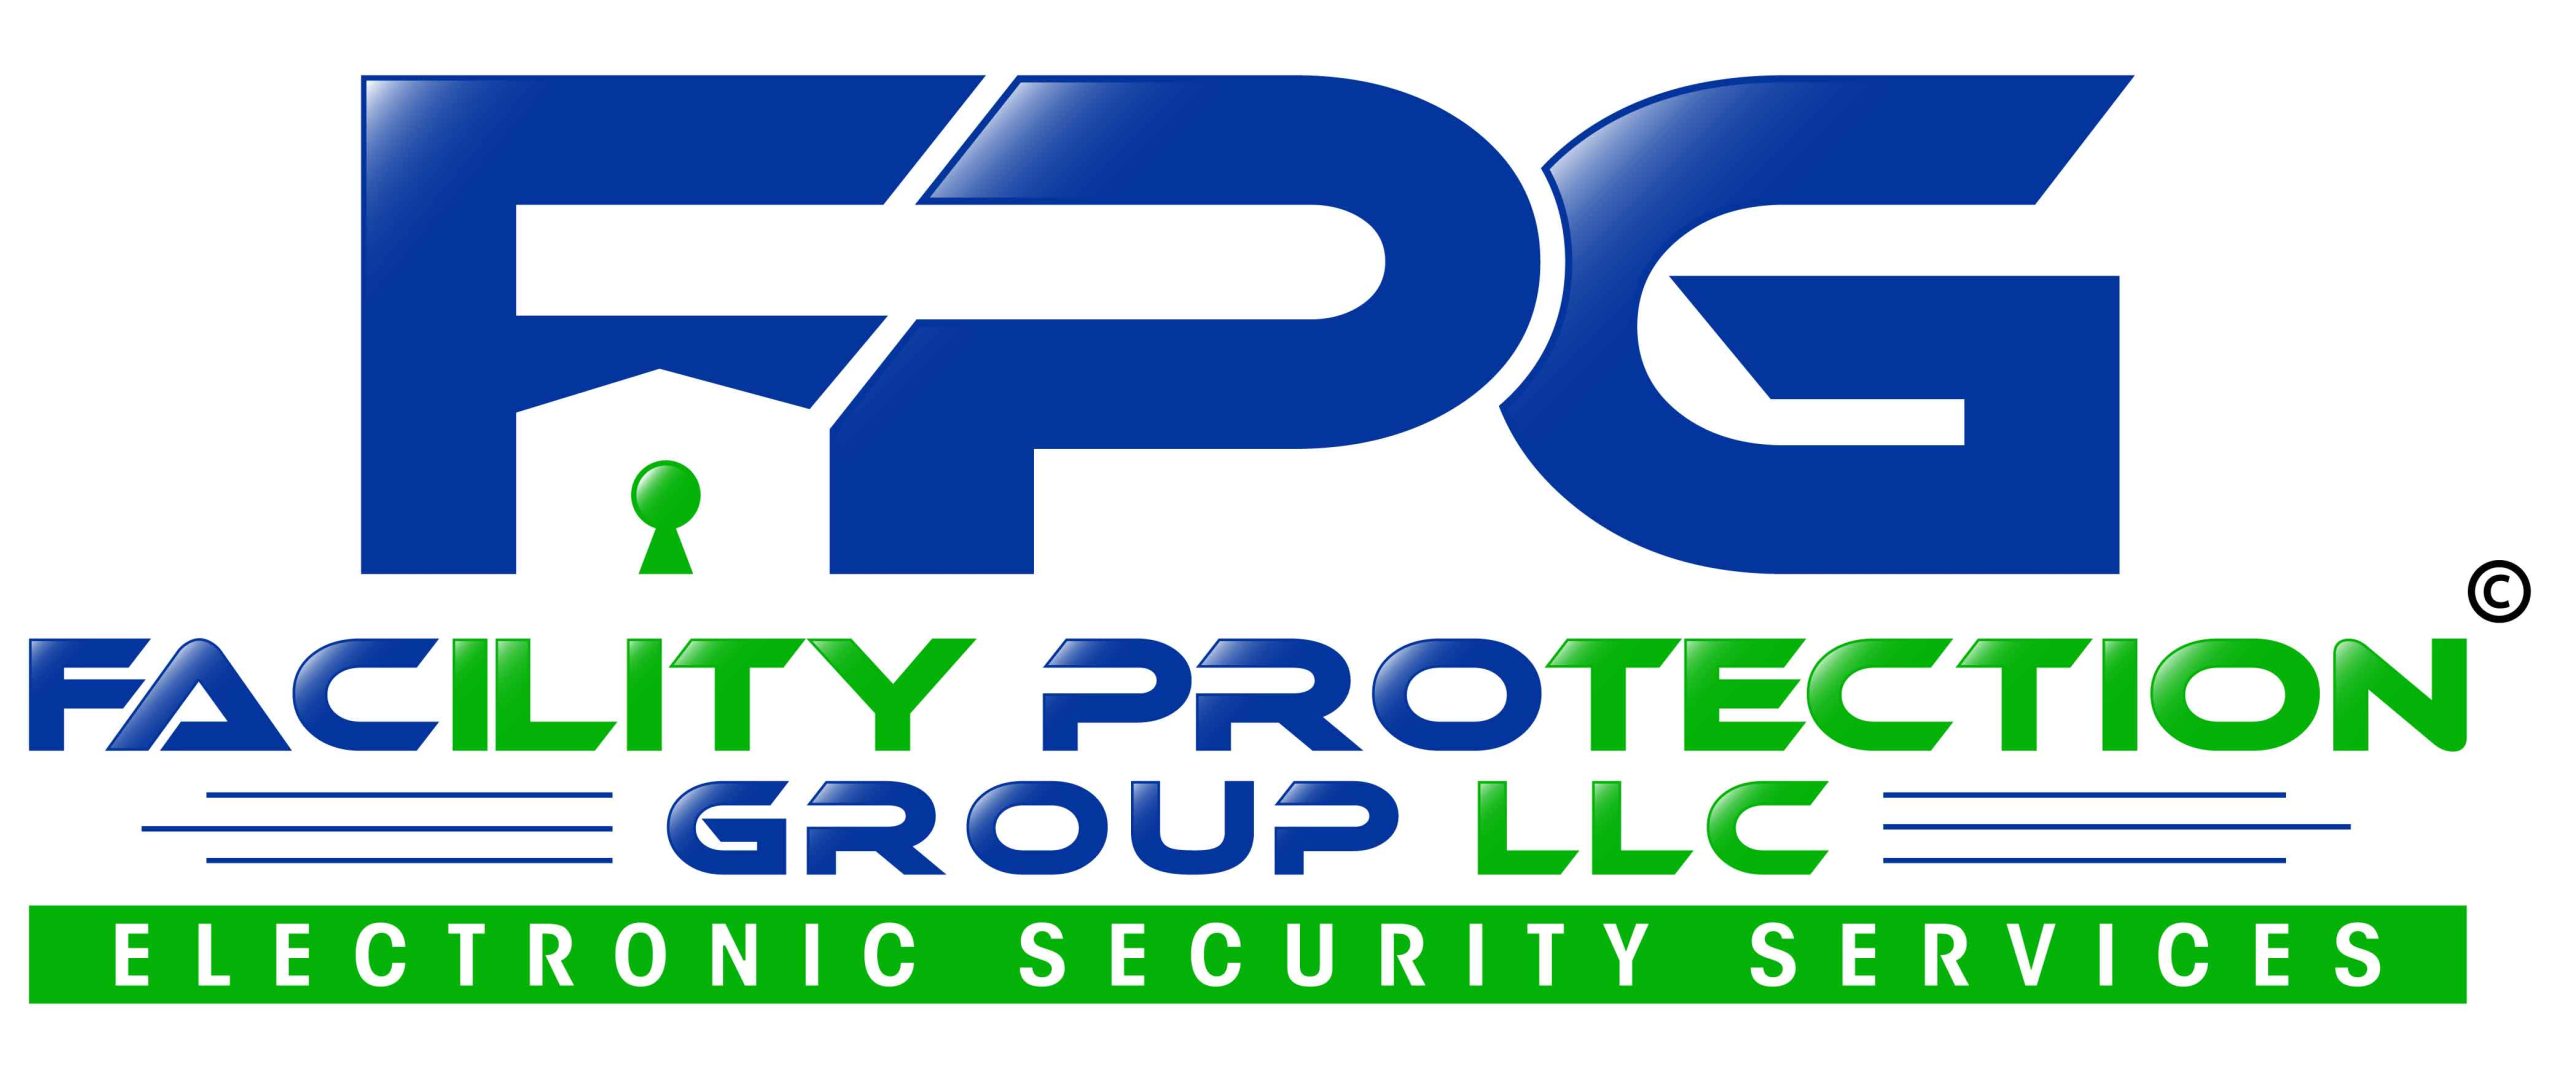 Facility Protection Group